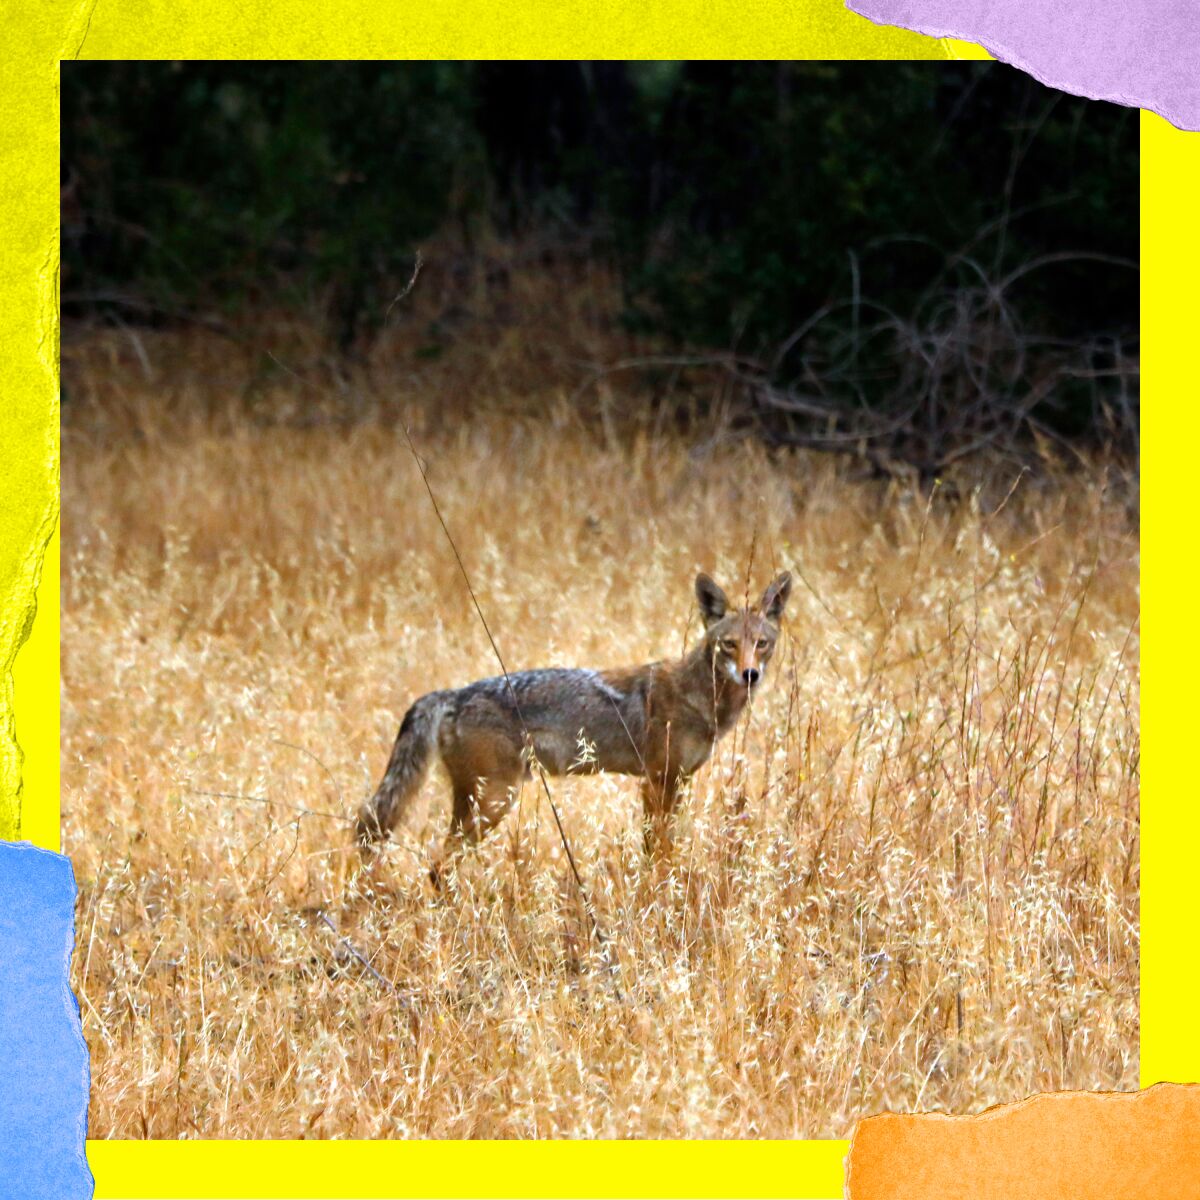 A coyote stands amid dry grass on a hillside.